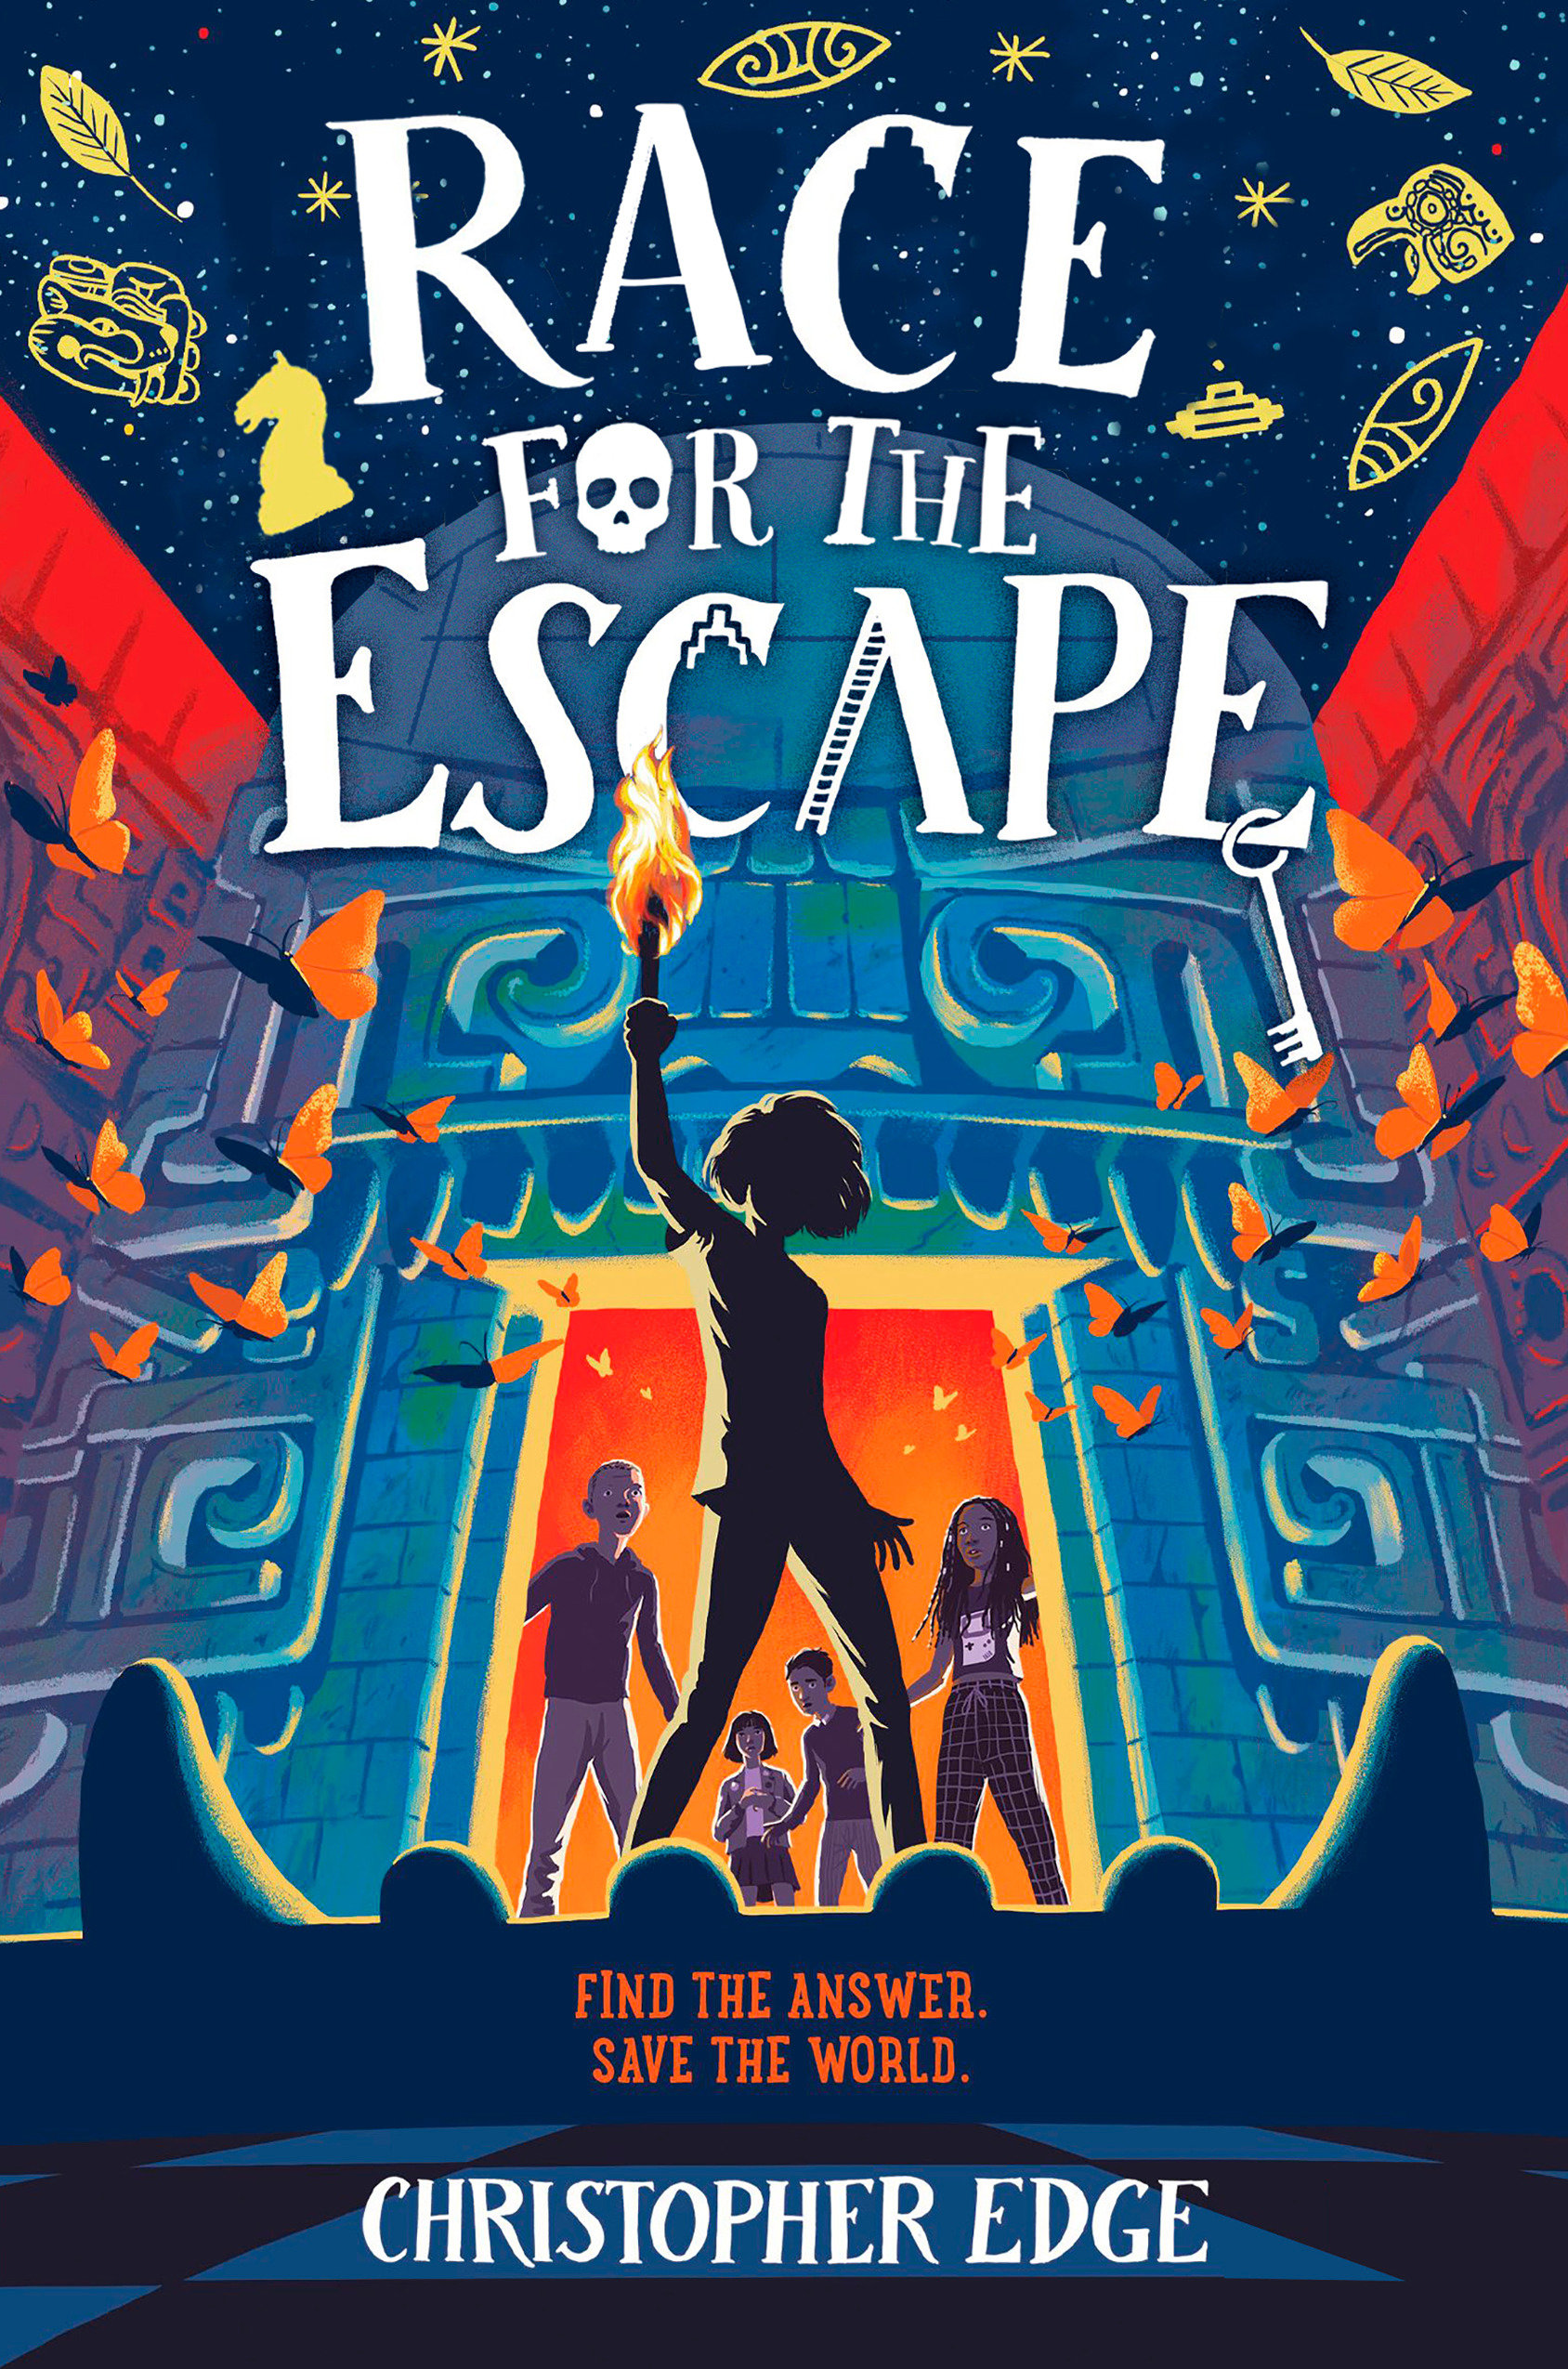 Race for The Escape (Hardcover Book)